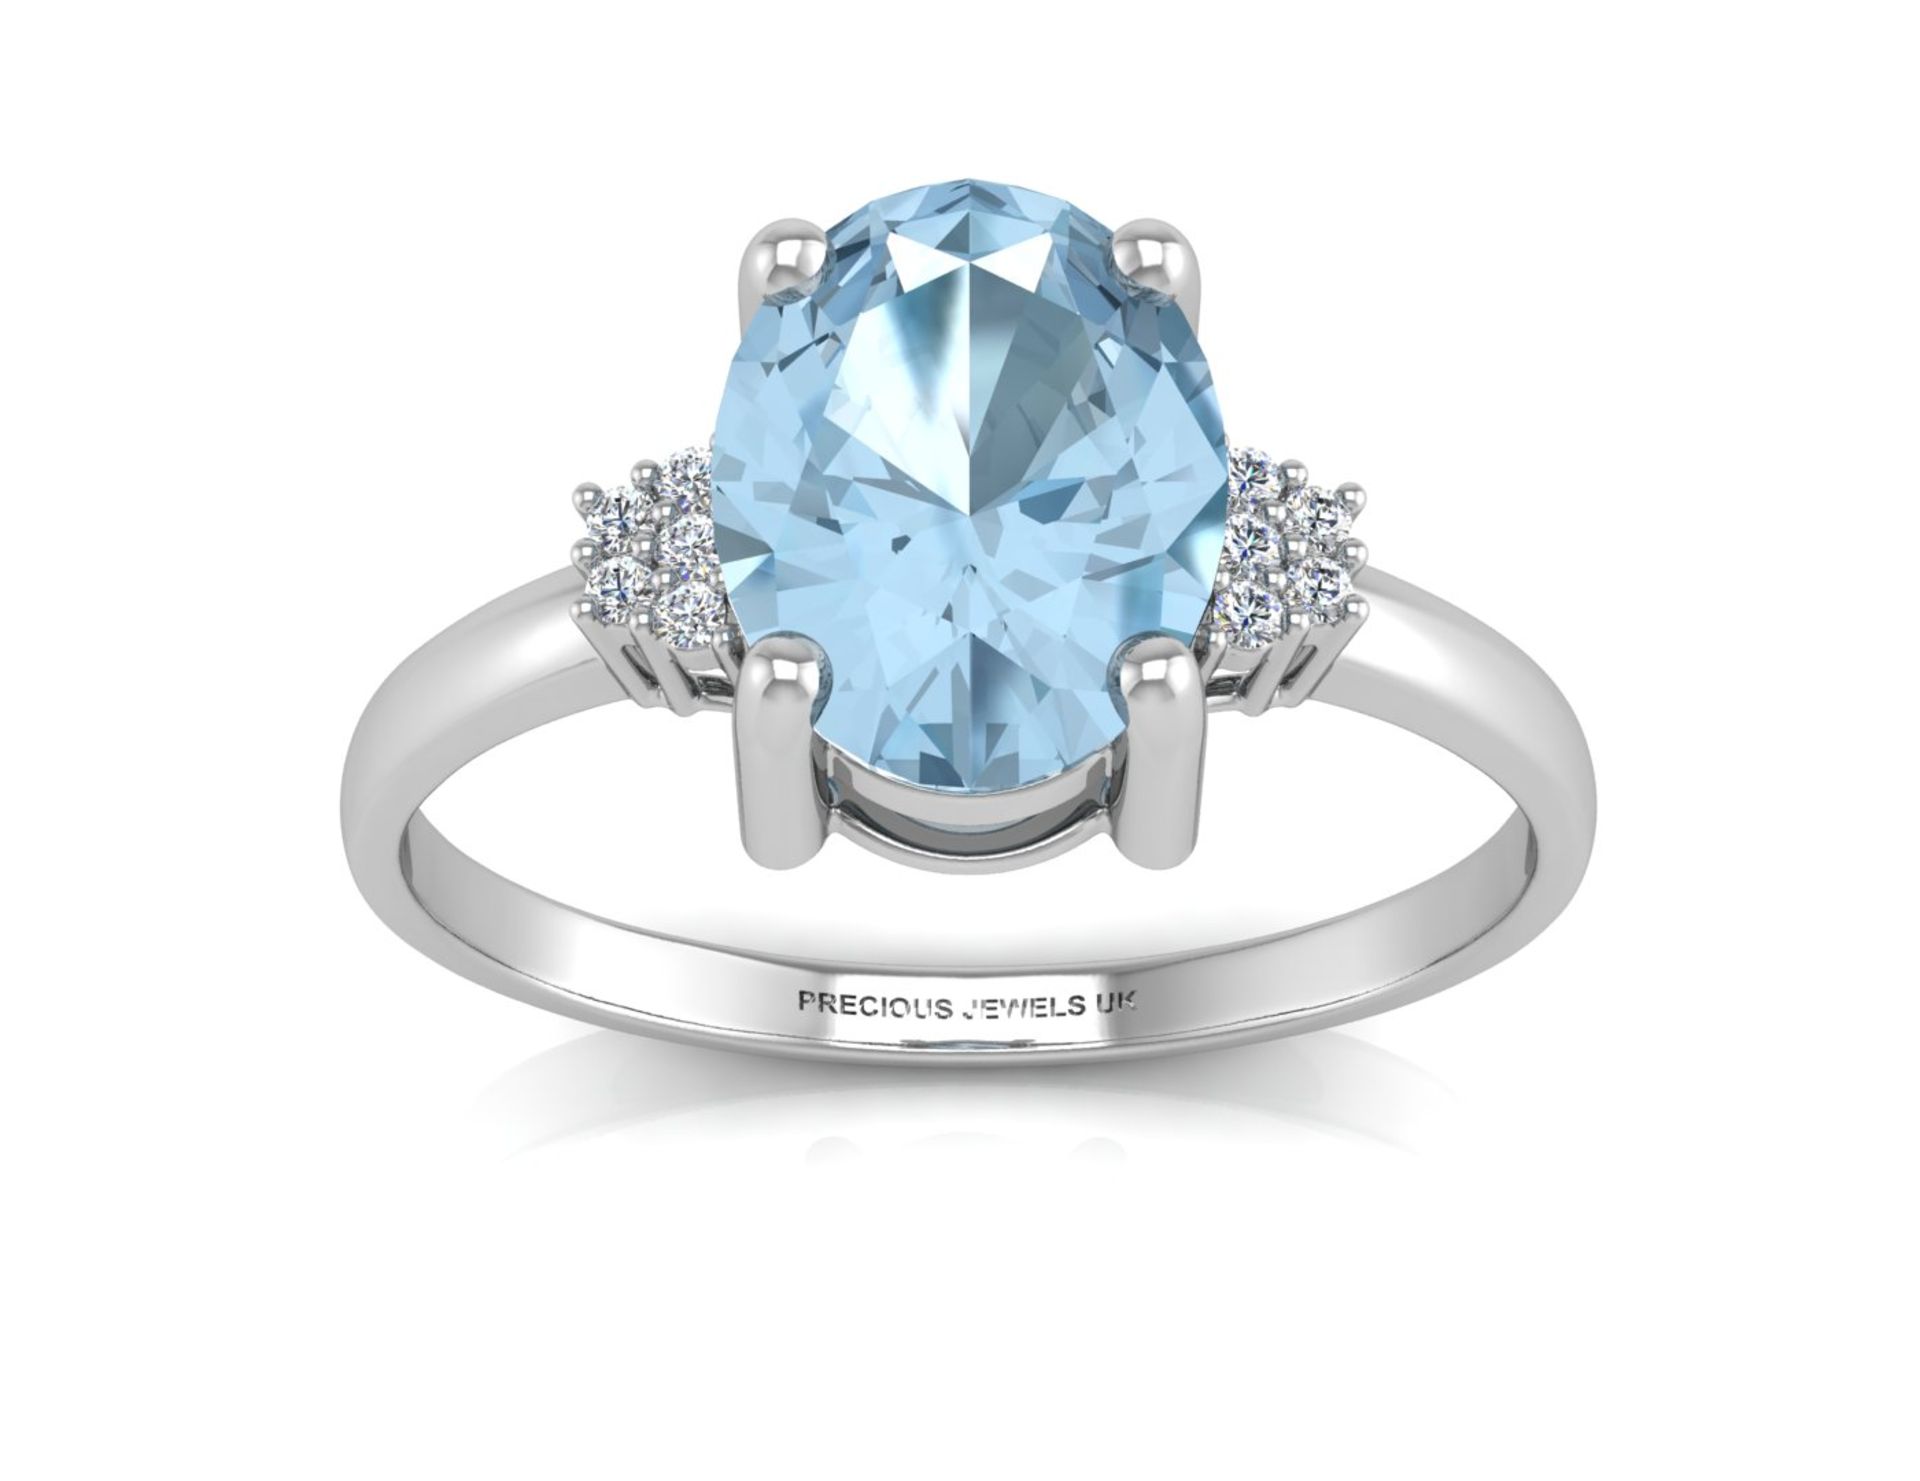 9ct White Gold Diamond And Blue Topaz Ring 0.03 Carats - Valued by AGI £795.00 - 9ct White Gold - Image 3 of 4